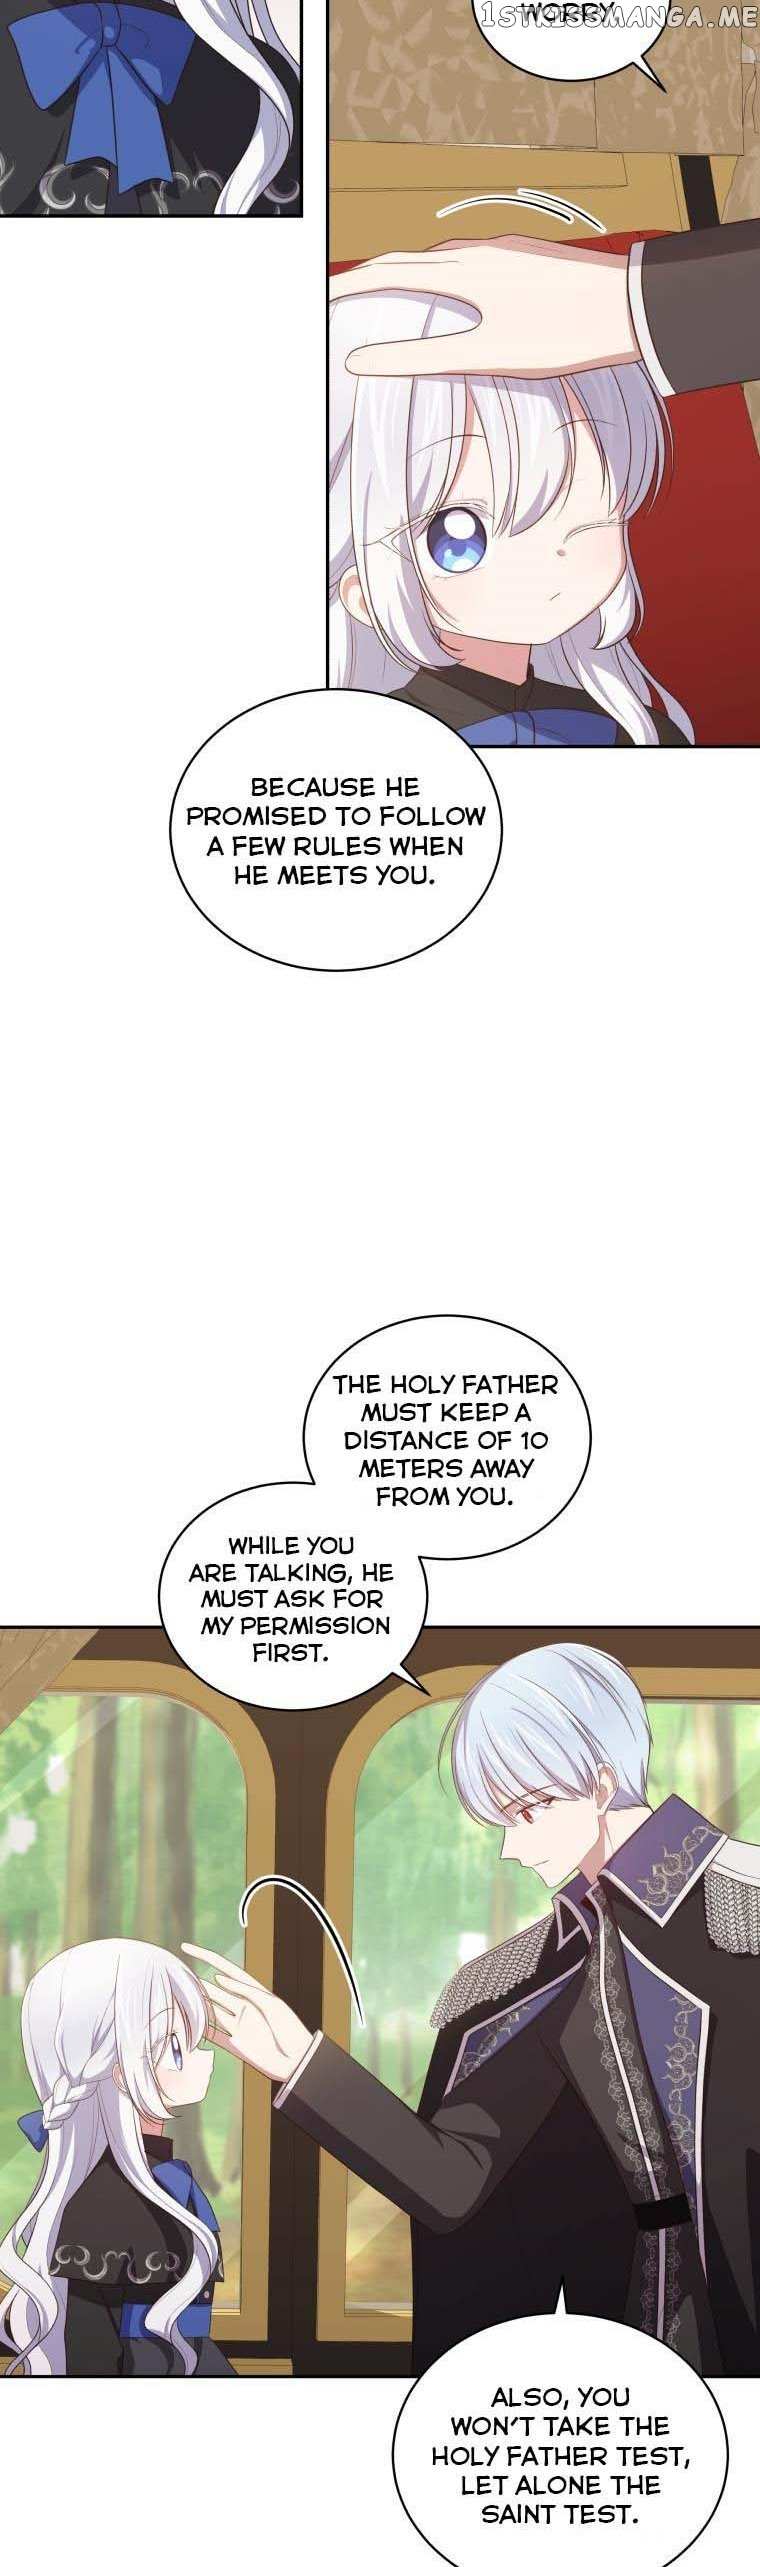 The Villain's Beloved Daughter  - page 8